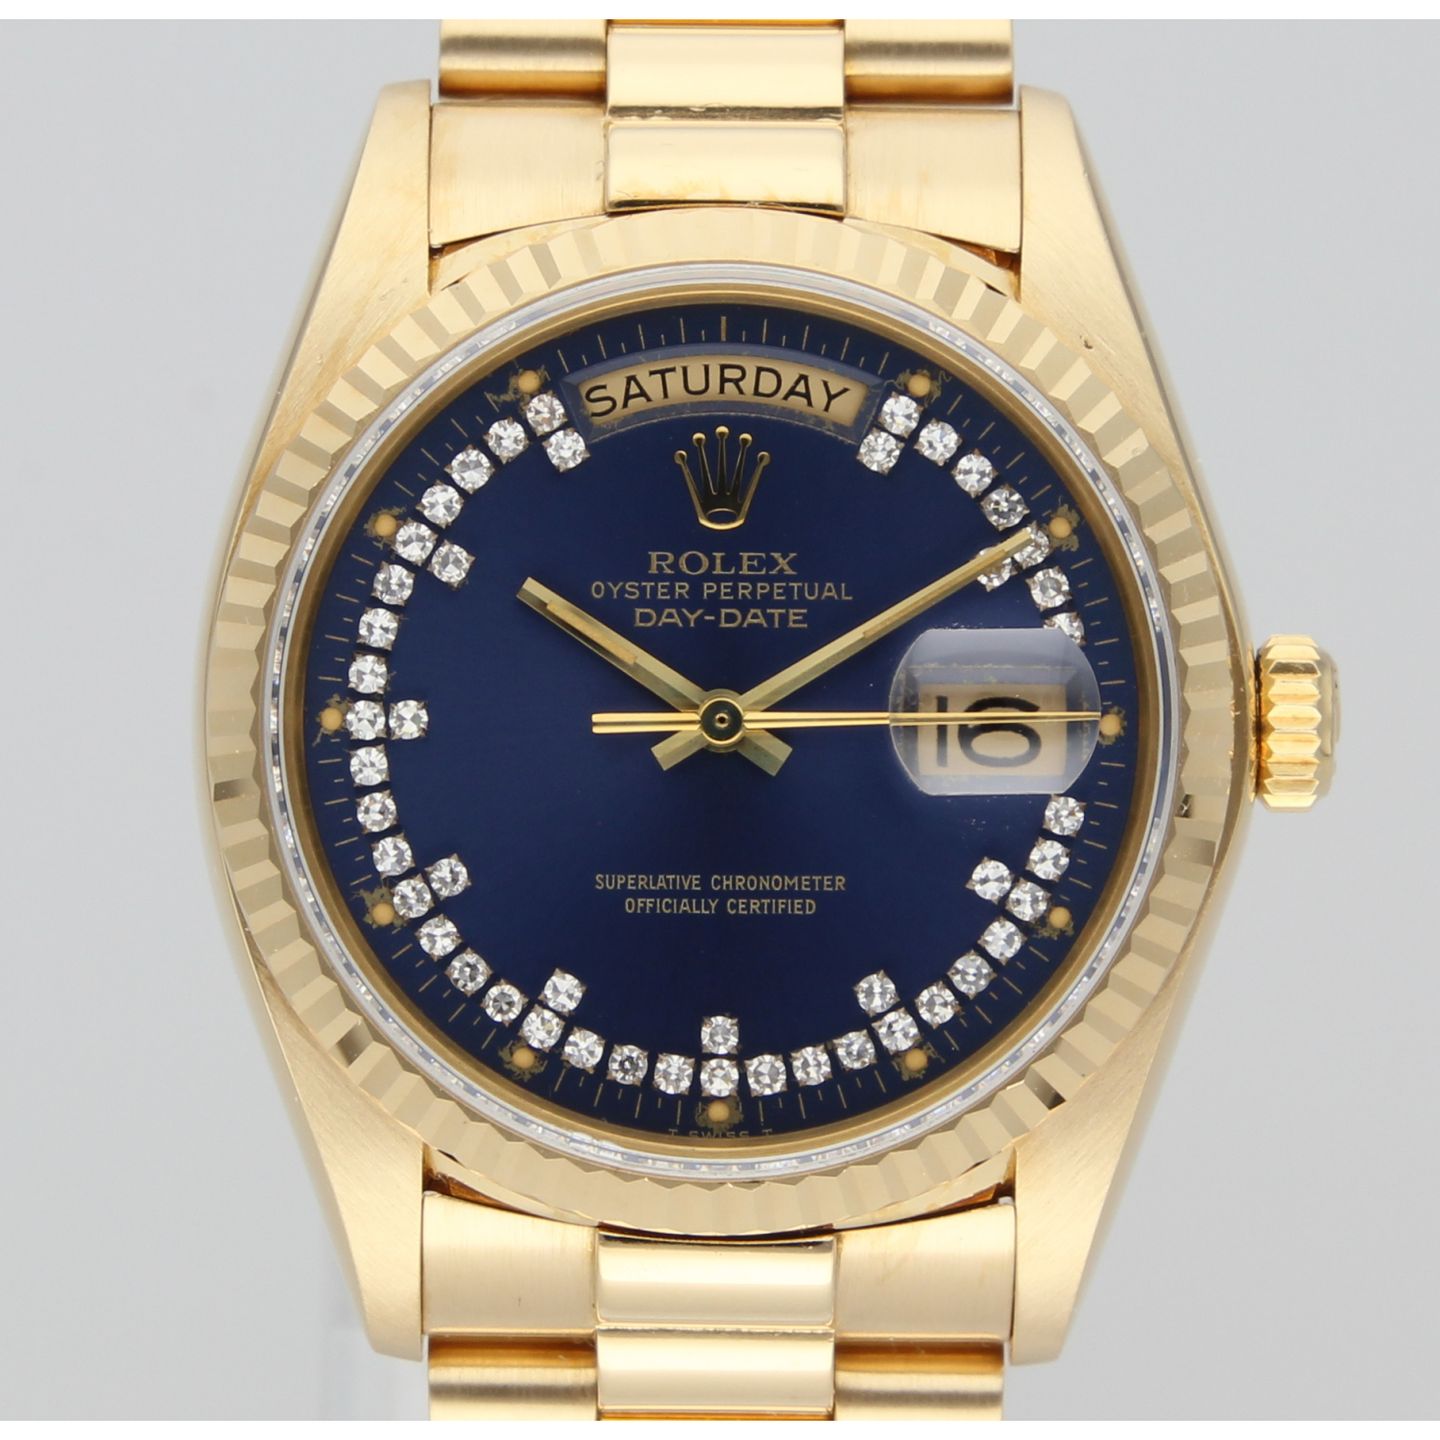 Rolex Day-Date 36 18038 (1981) - Blue dial 36 mm Yellow Gold case (1/8)